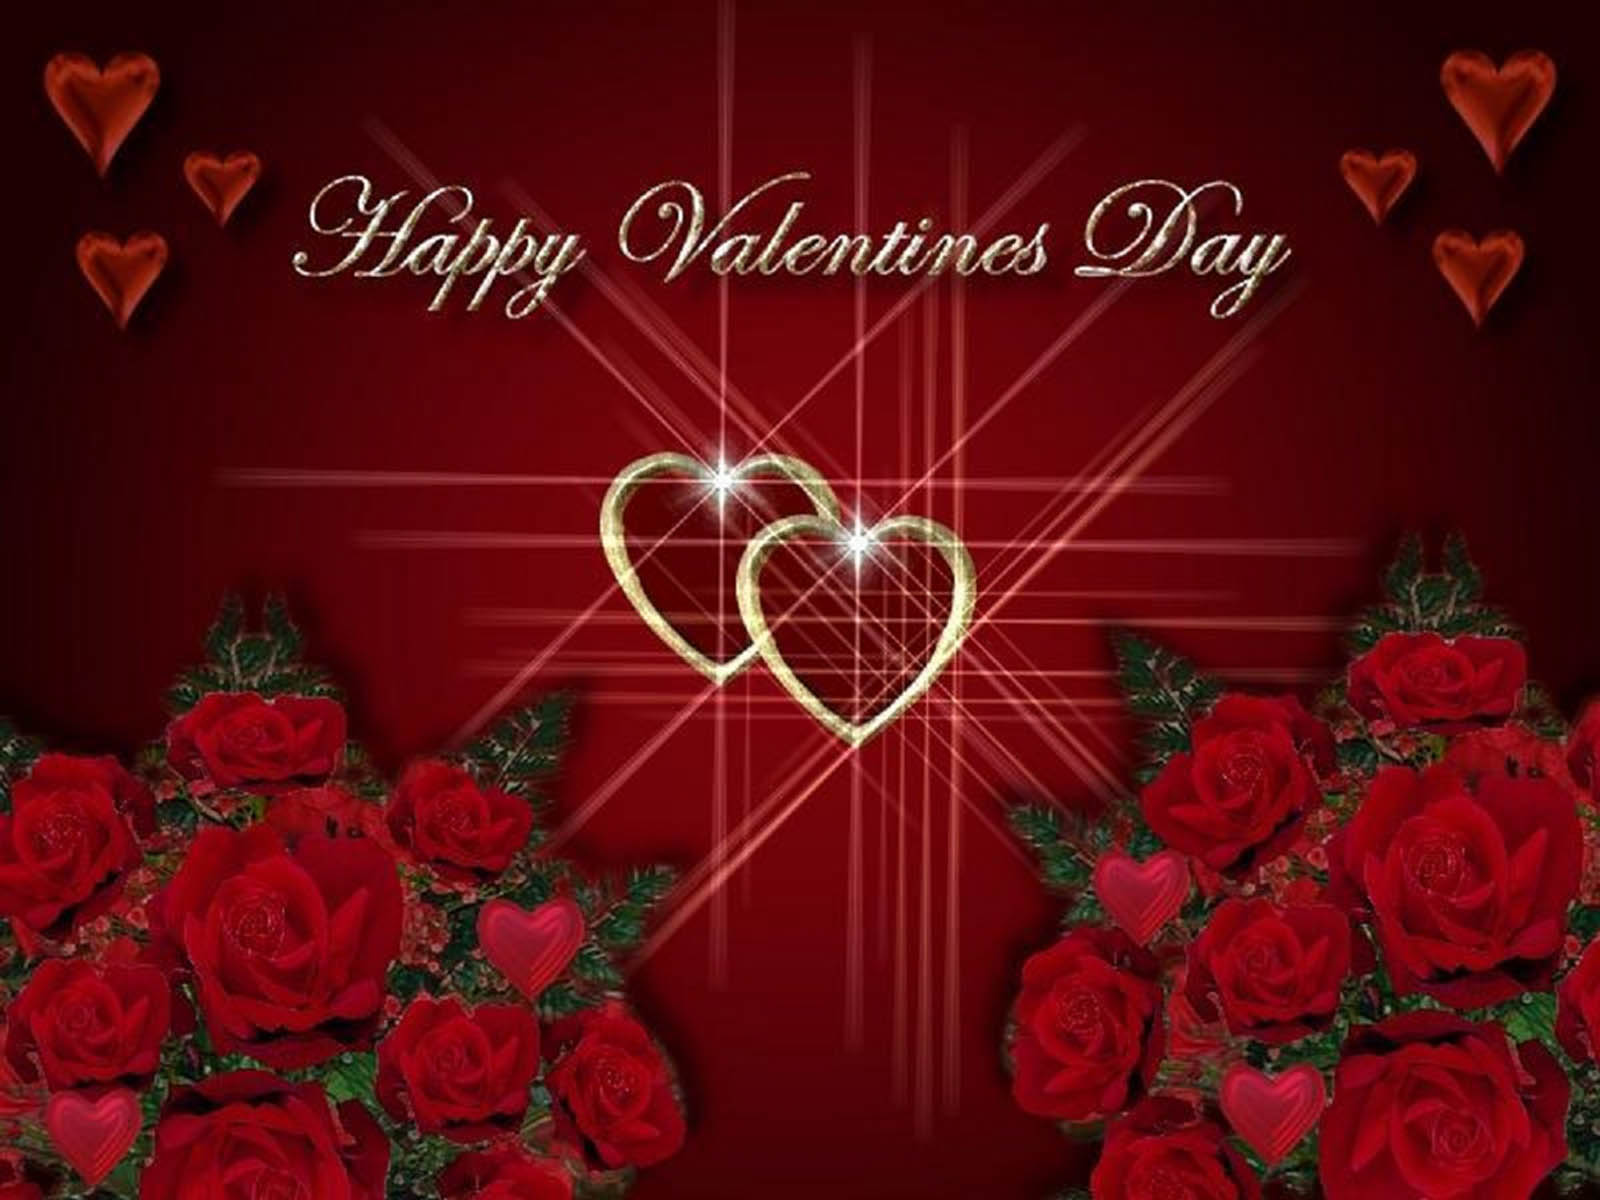  Wallpapers Valentines Day Desktop Backgrounds Valentines Day Photos